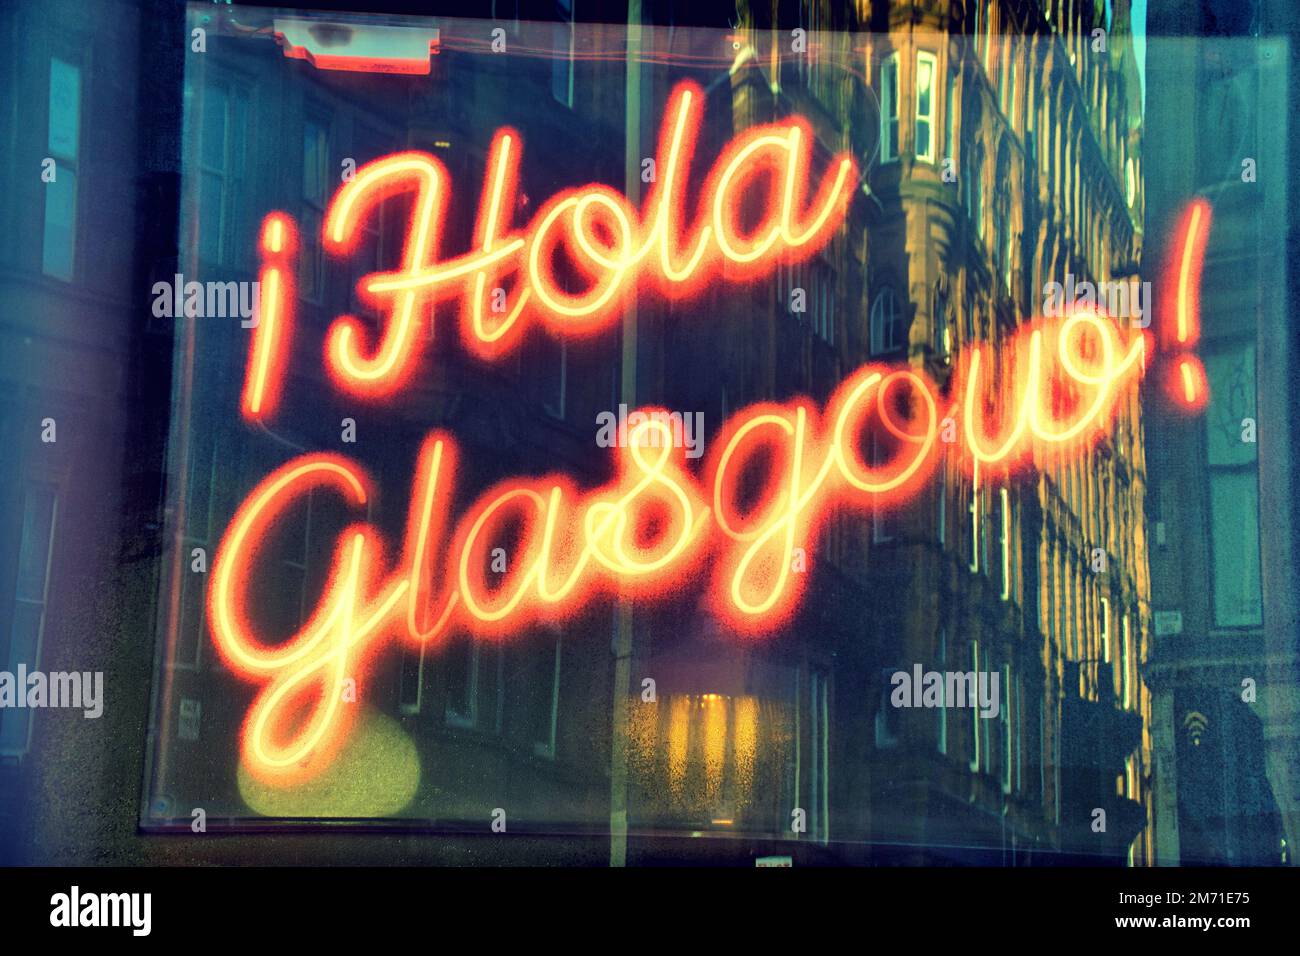 Hola Glasgow neon sign with tenement reflection in window  in Spanish hello Stock Photo